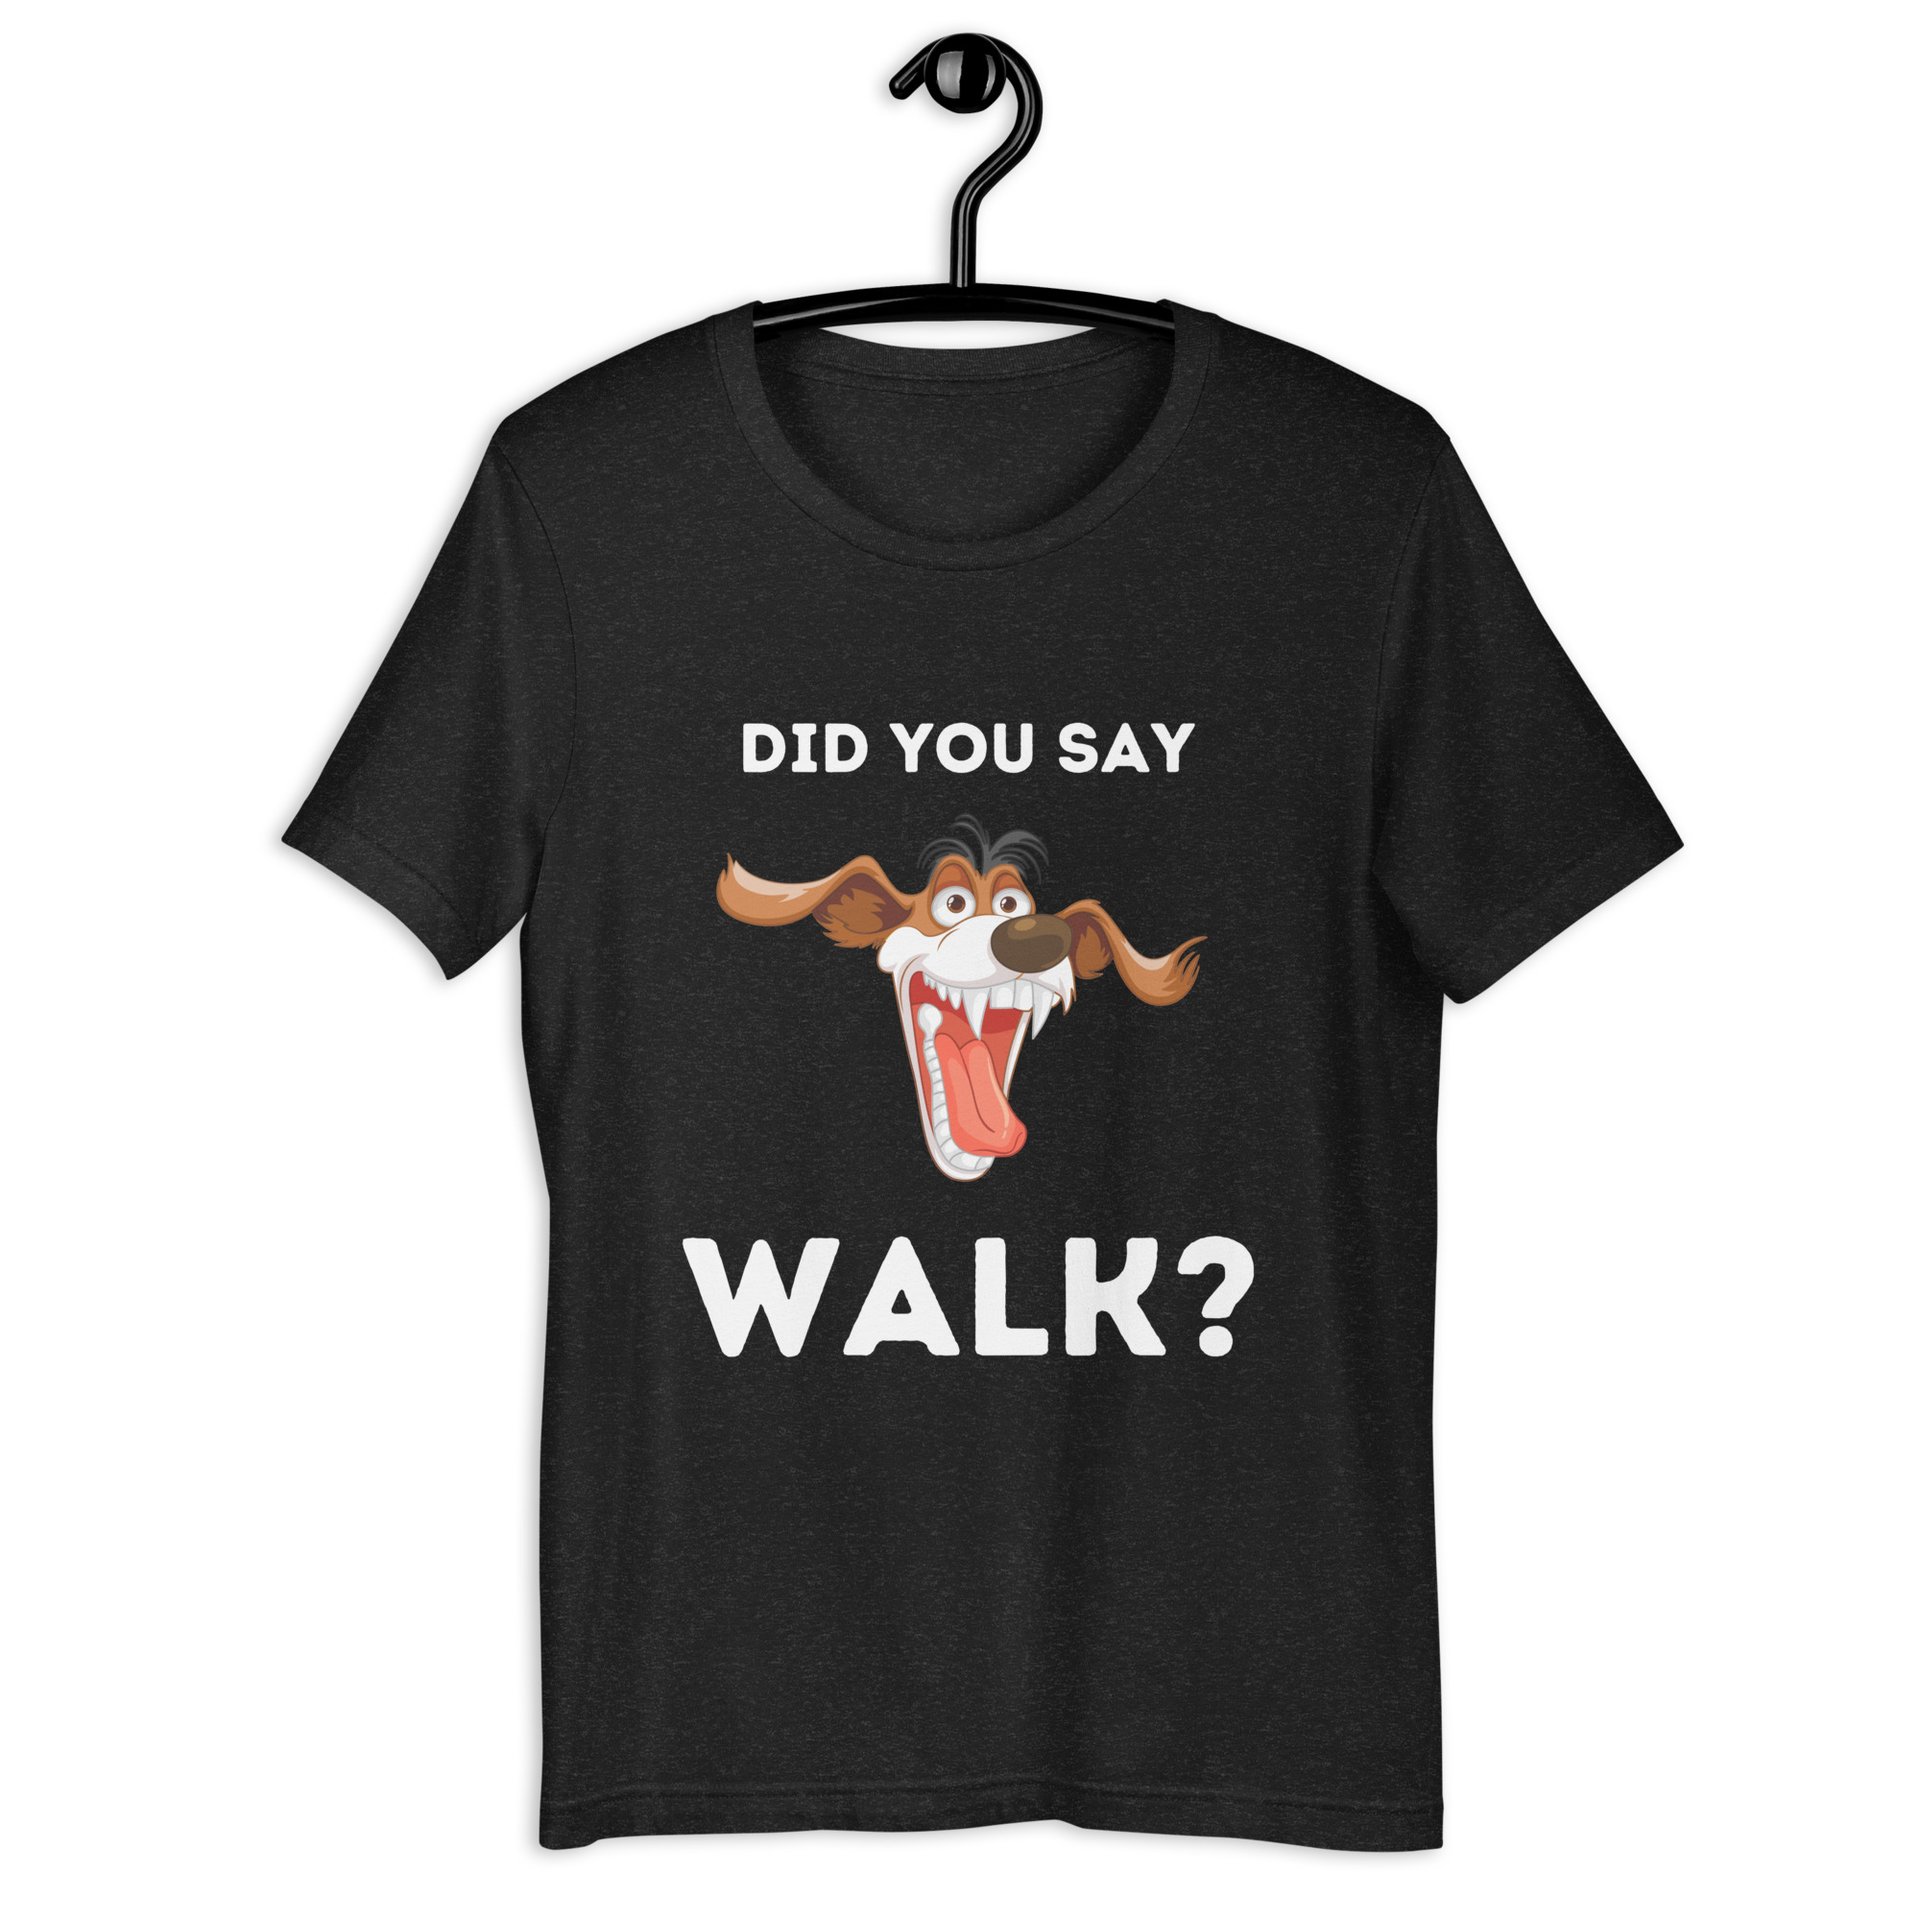 The Funny 'Did You Say Walk?' Dog Unisex T-Shirt captures the excitement dogs feel at the mention of a walk. Made from a comfortable, durable blend, it features a vibrant graphic that dog lovers will relate to. Available in various sizes and colors, it's perfect for casual wear, highlighting a universal moment in dog ownership with humor and style. Black Heather